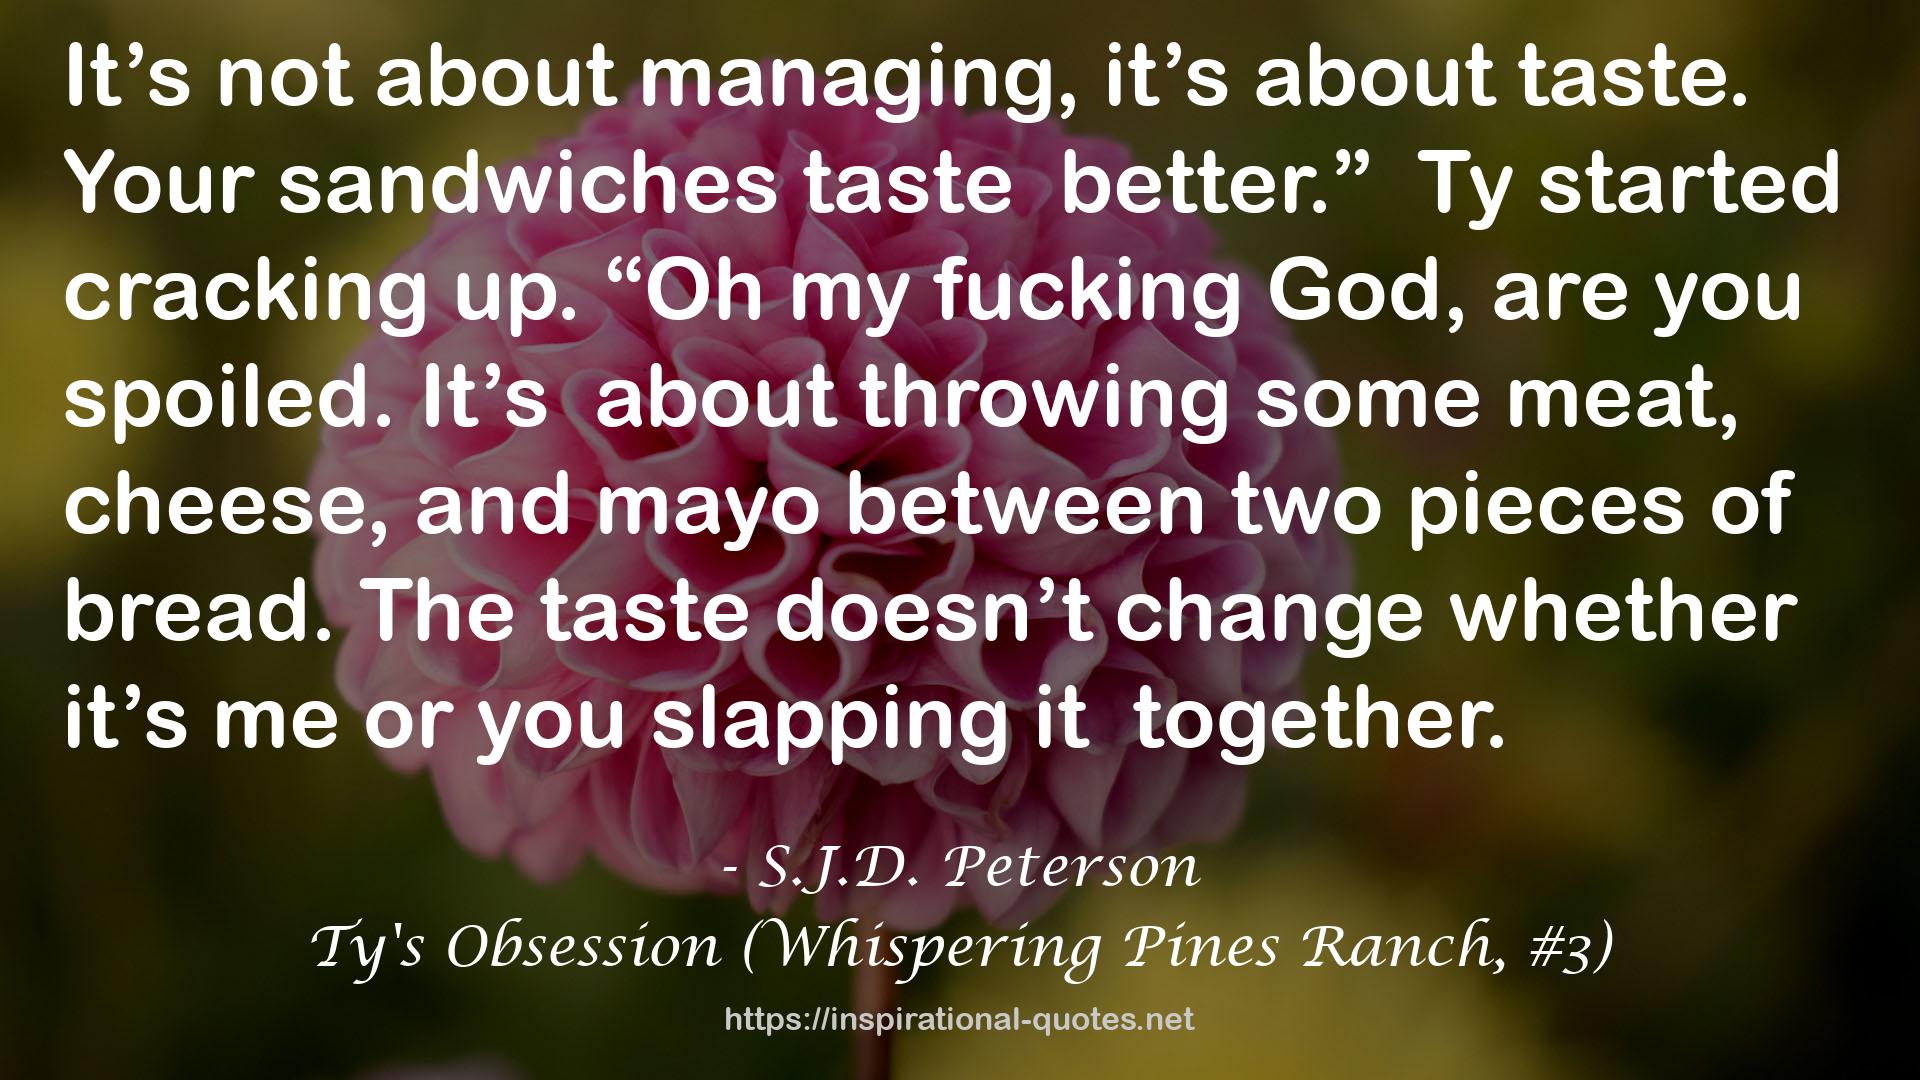 Ty's Obsession (Whispering Pines Ranch, #3) QUOTES